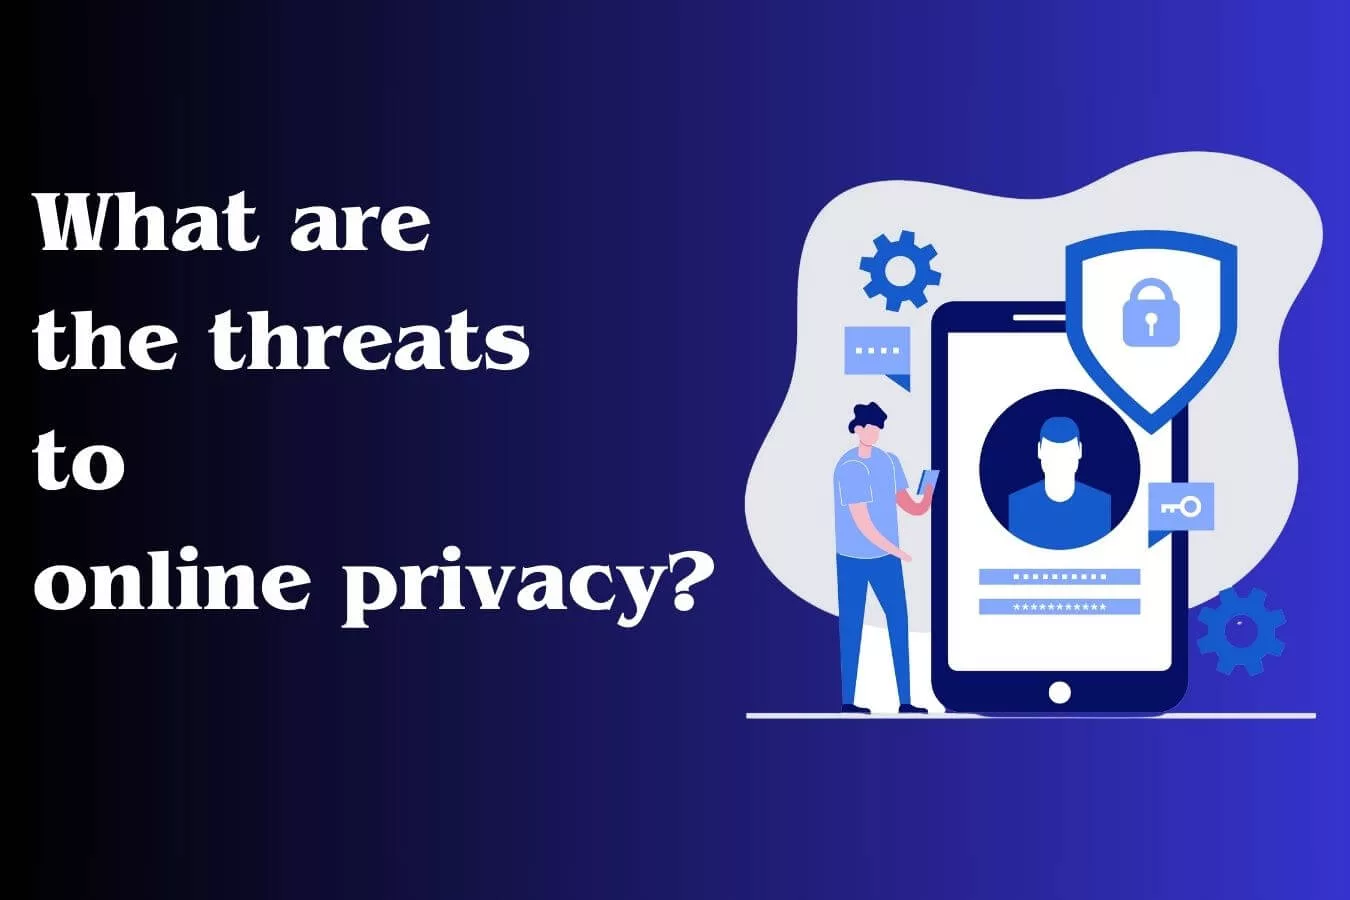 What are the threats to online privacy?